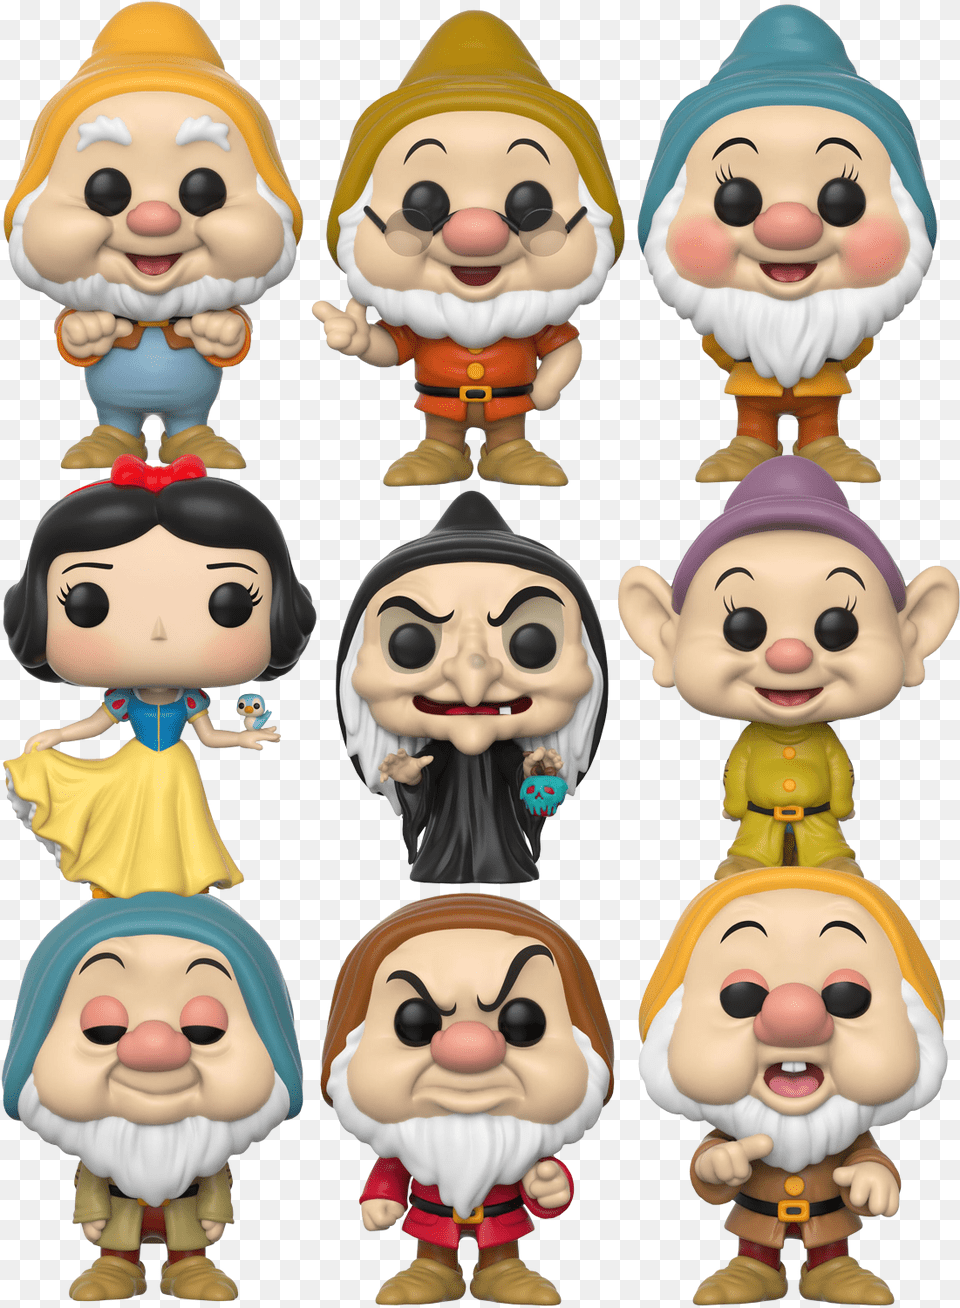 Snow White And The Seven Dwarfs Funko Pop, Figurine, Baby, Person, Adult Png